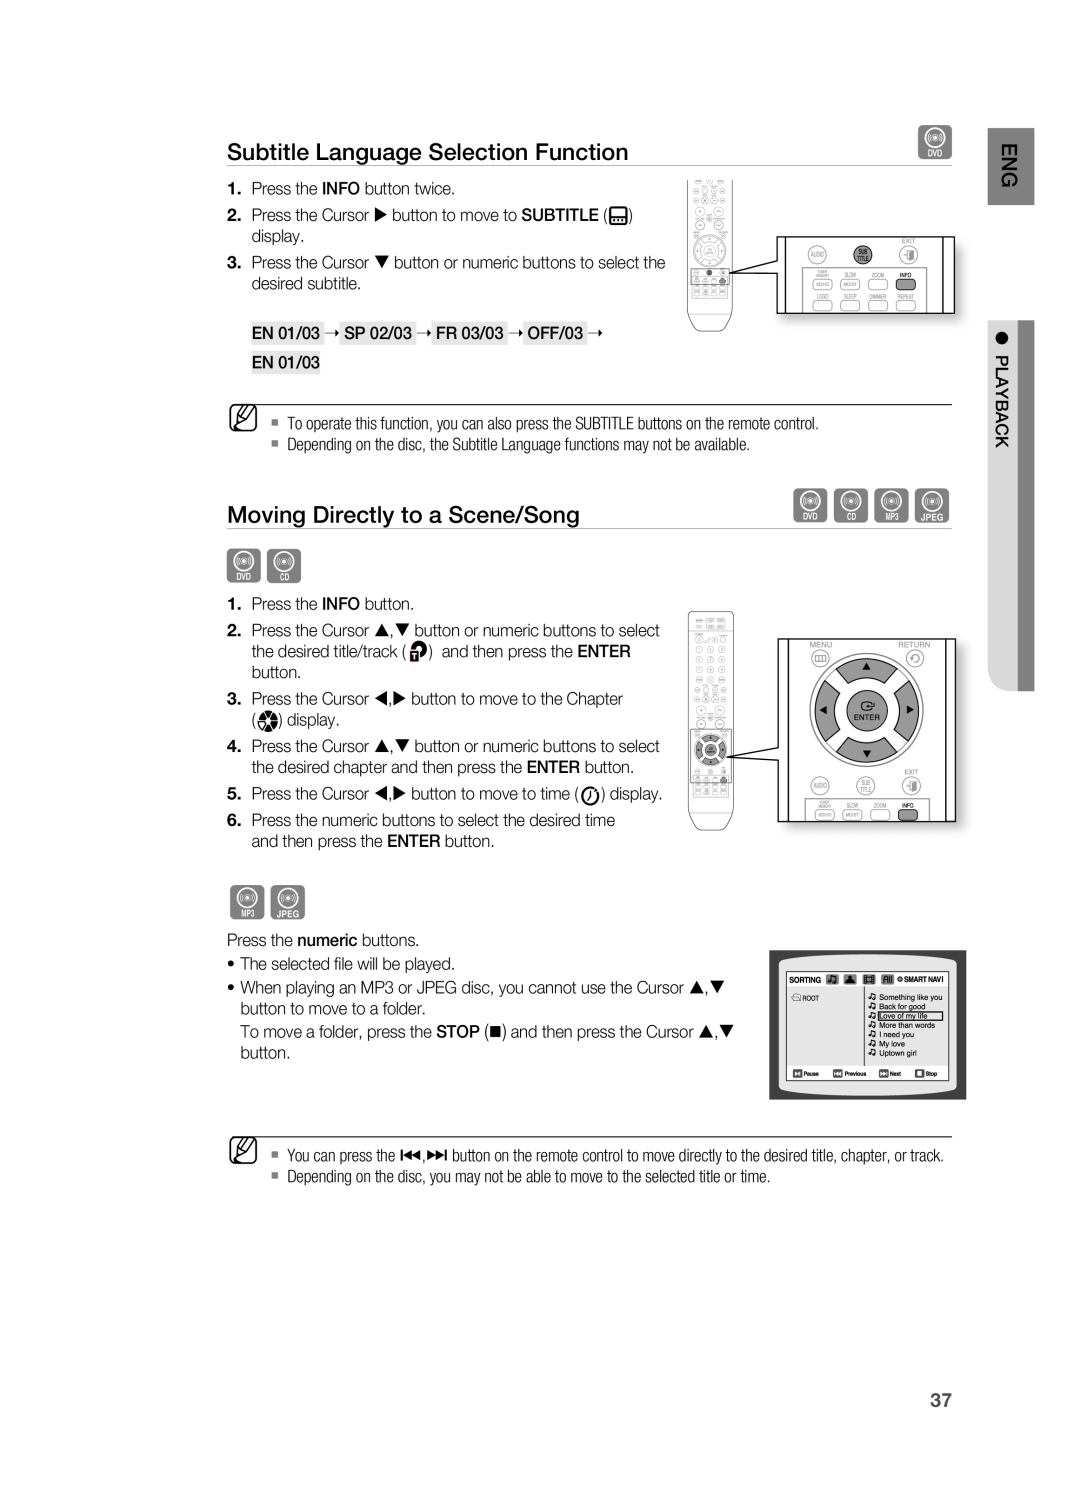 Samsung HT-X810 user manual Subtitle language Selection Function, Moving Directly to a Scene/Song 